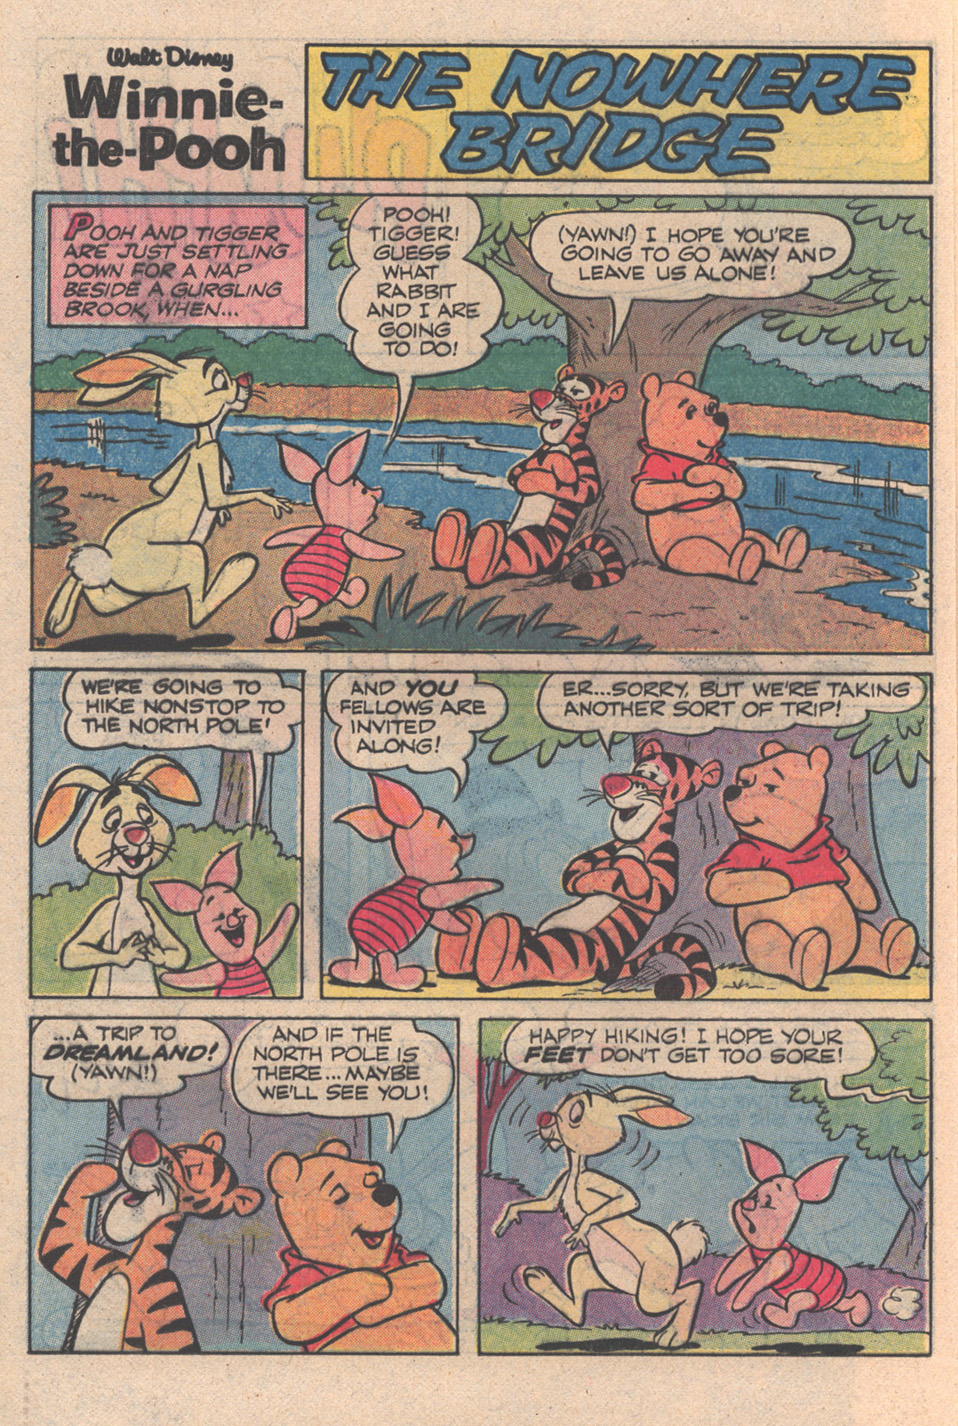 Read online Winnie-the-Pooh comic -  Issue #16 - 16